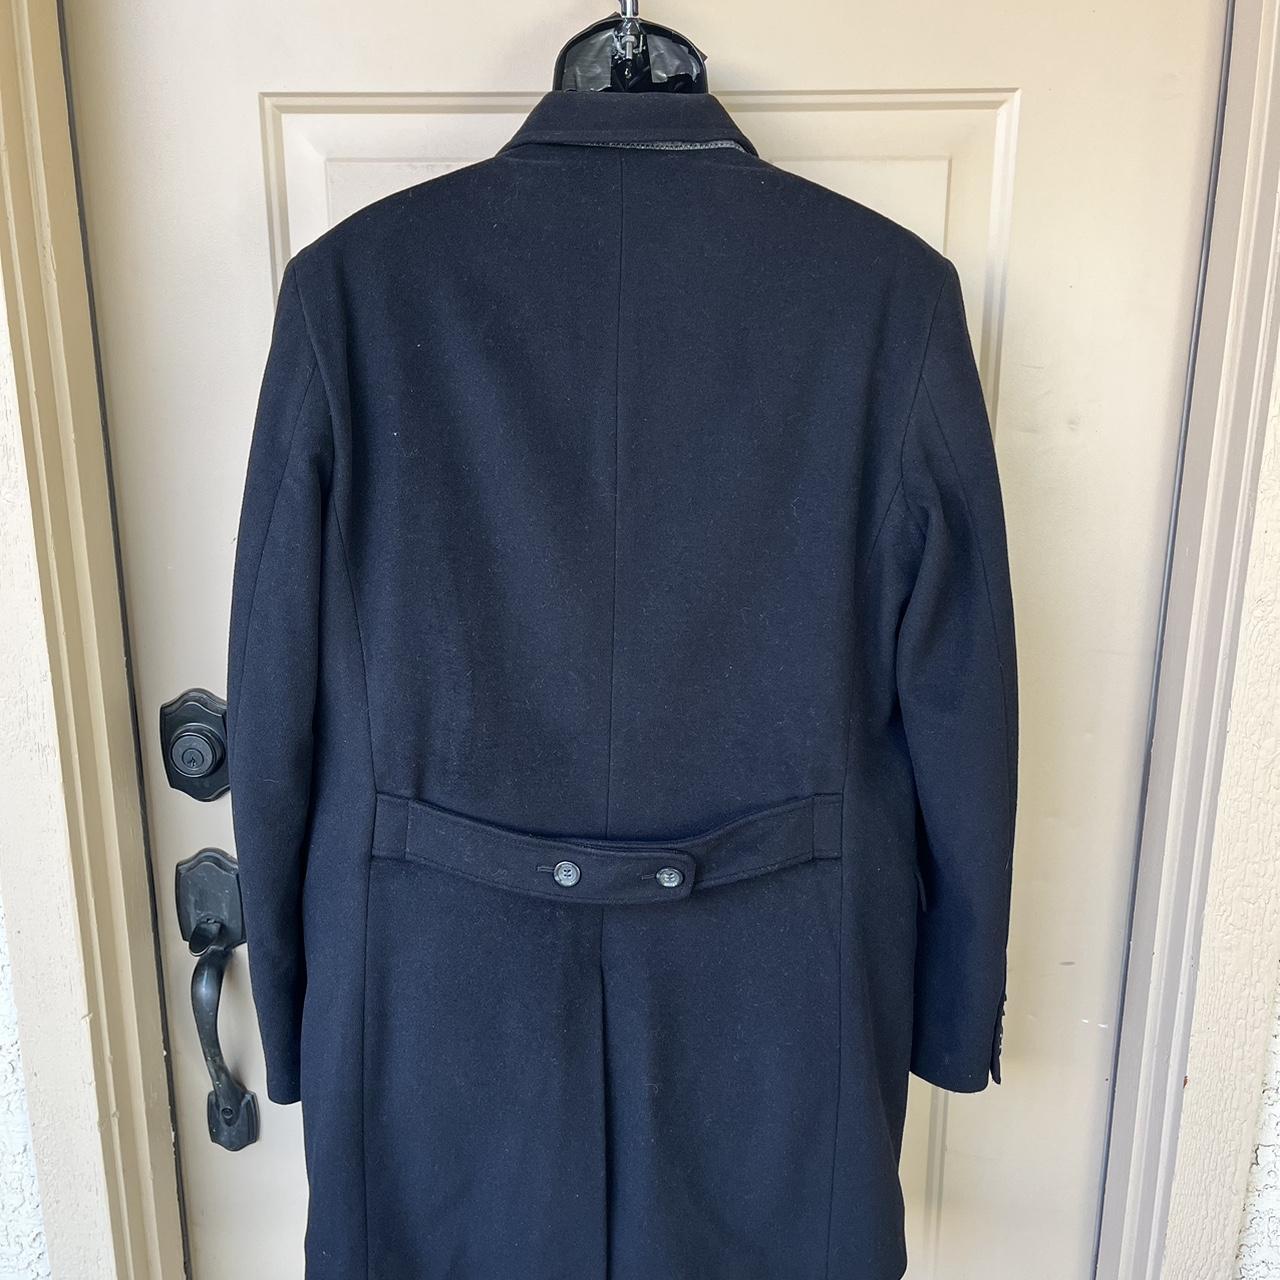 Guess Black Wool Cashmere Peacoat Single Breasted... - Depop